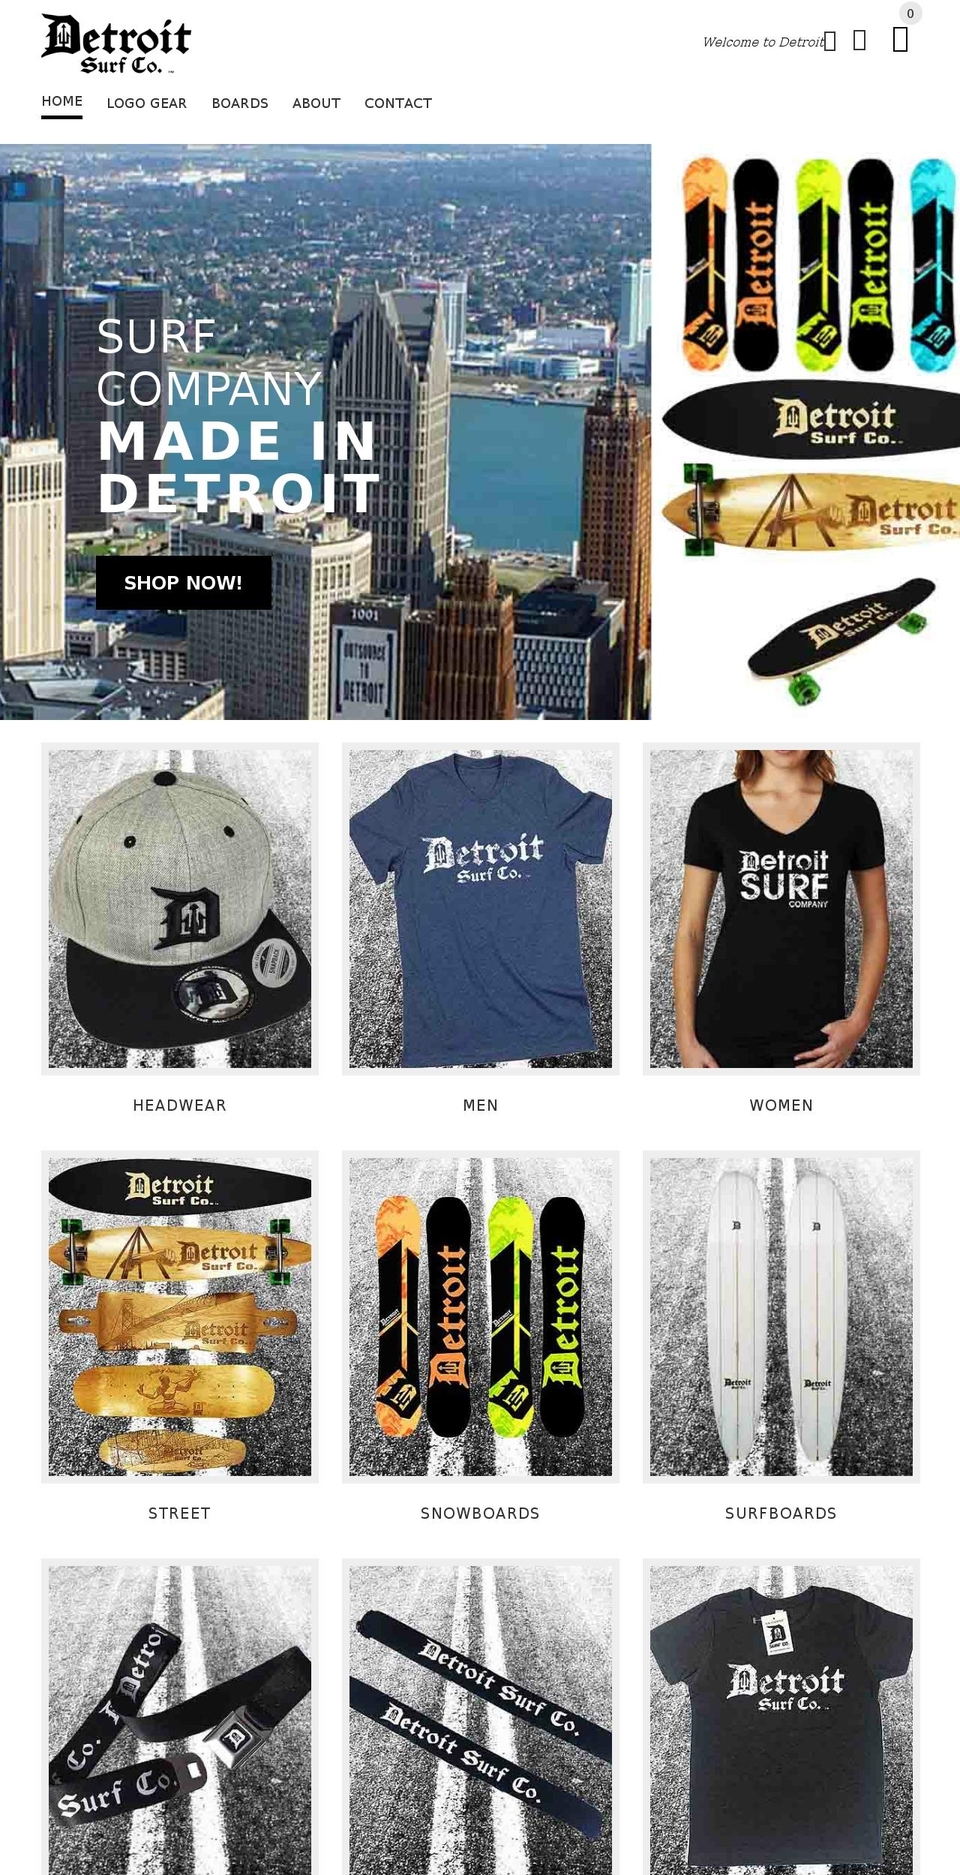 yourstore-v1-4-8 Shopify theme site example detroitsurfboardco.com